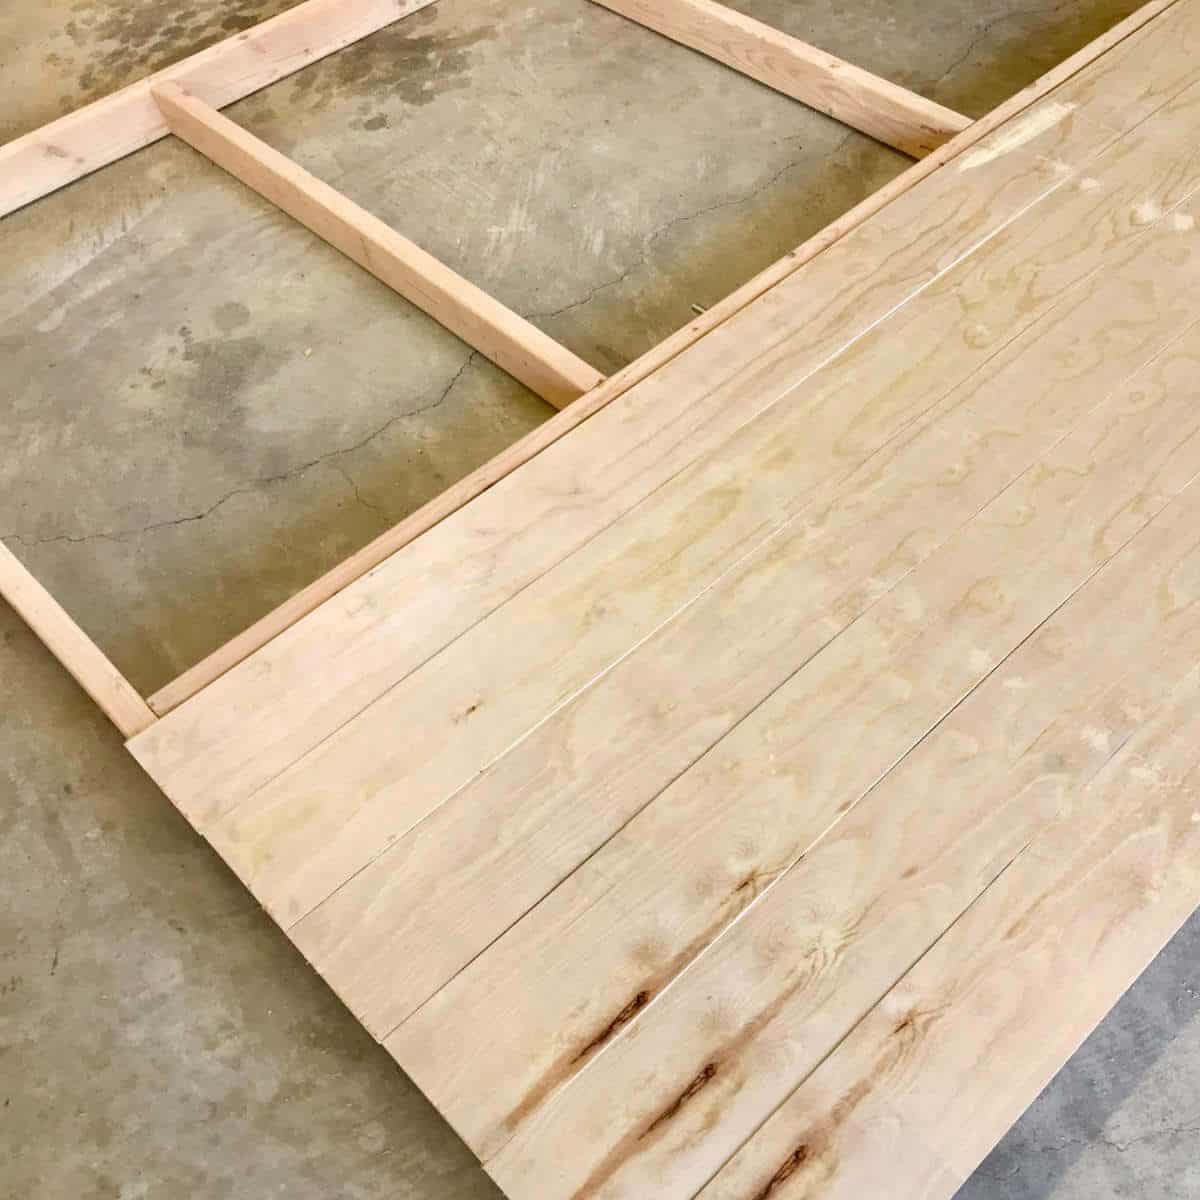 Placing plywood slats on a 2 x 4 frame to build a backdrop wall.